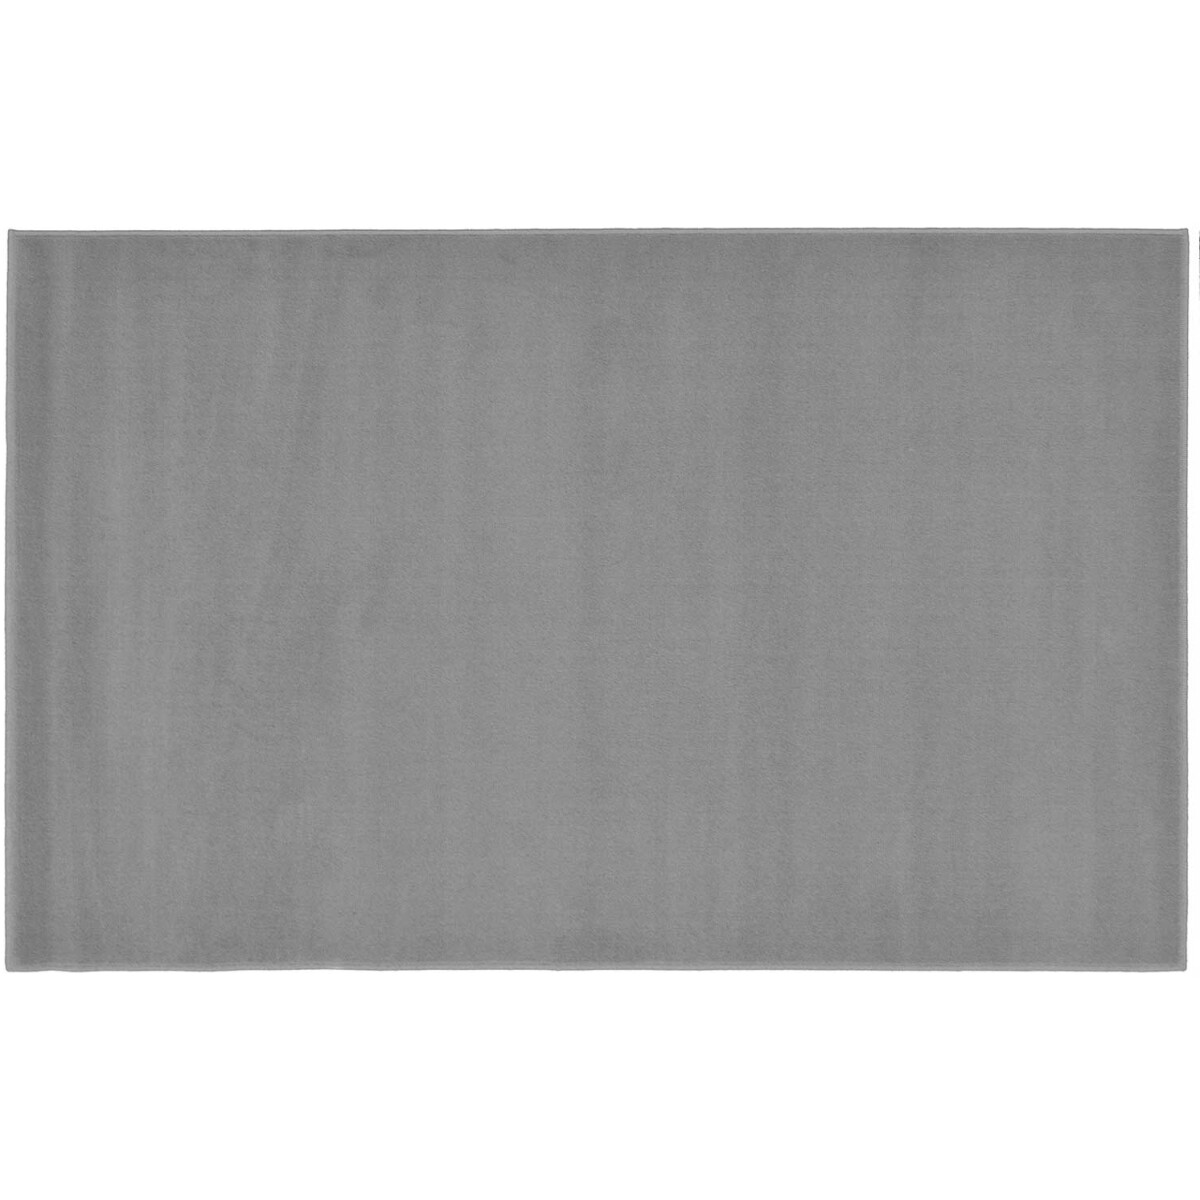 Maestro Primary Grey Rug 120cm x 170cm x 7mm pile from Lawson HIS